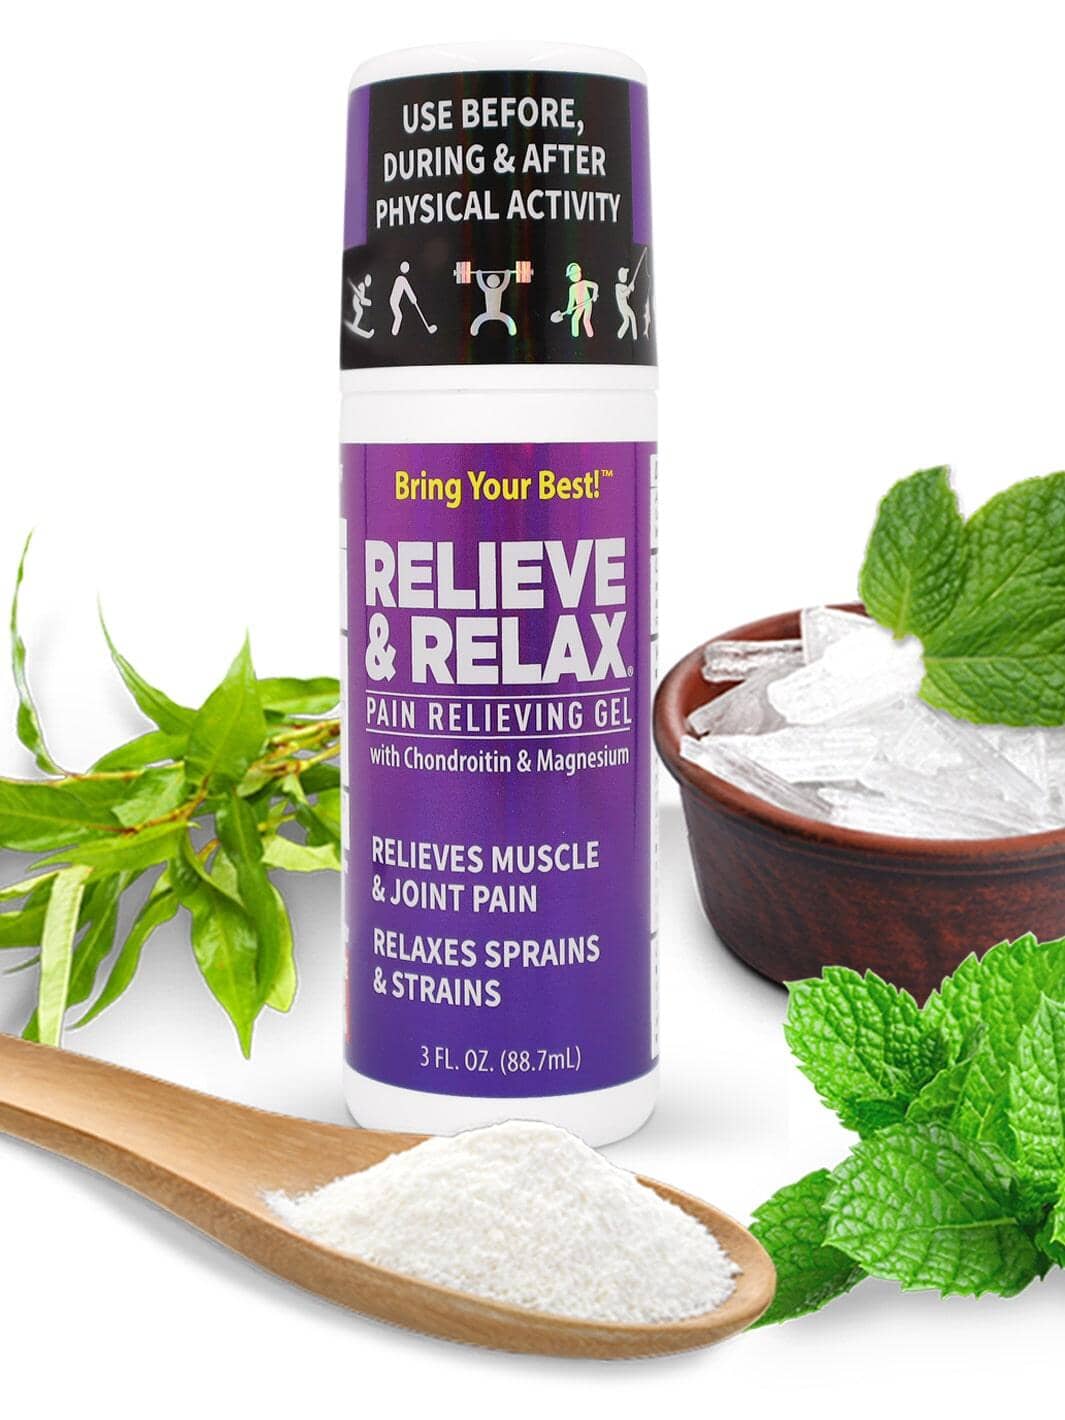 Using Back & Muscle Pain Relief 1.16% Gel to Relieve Pain